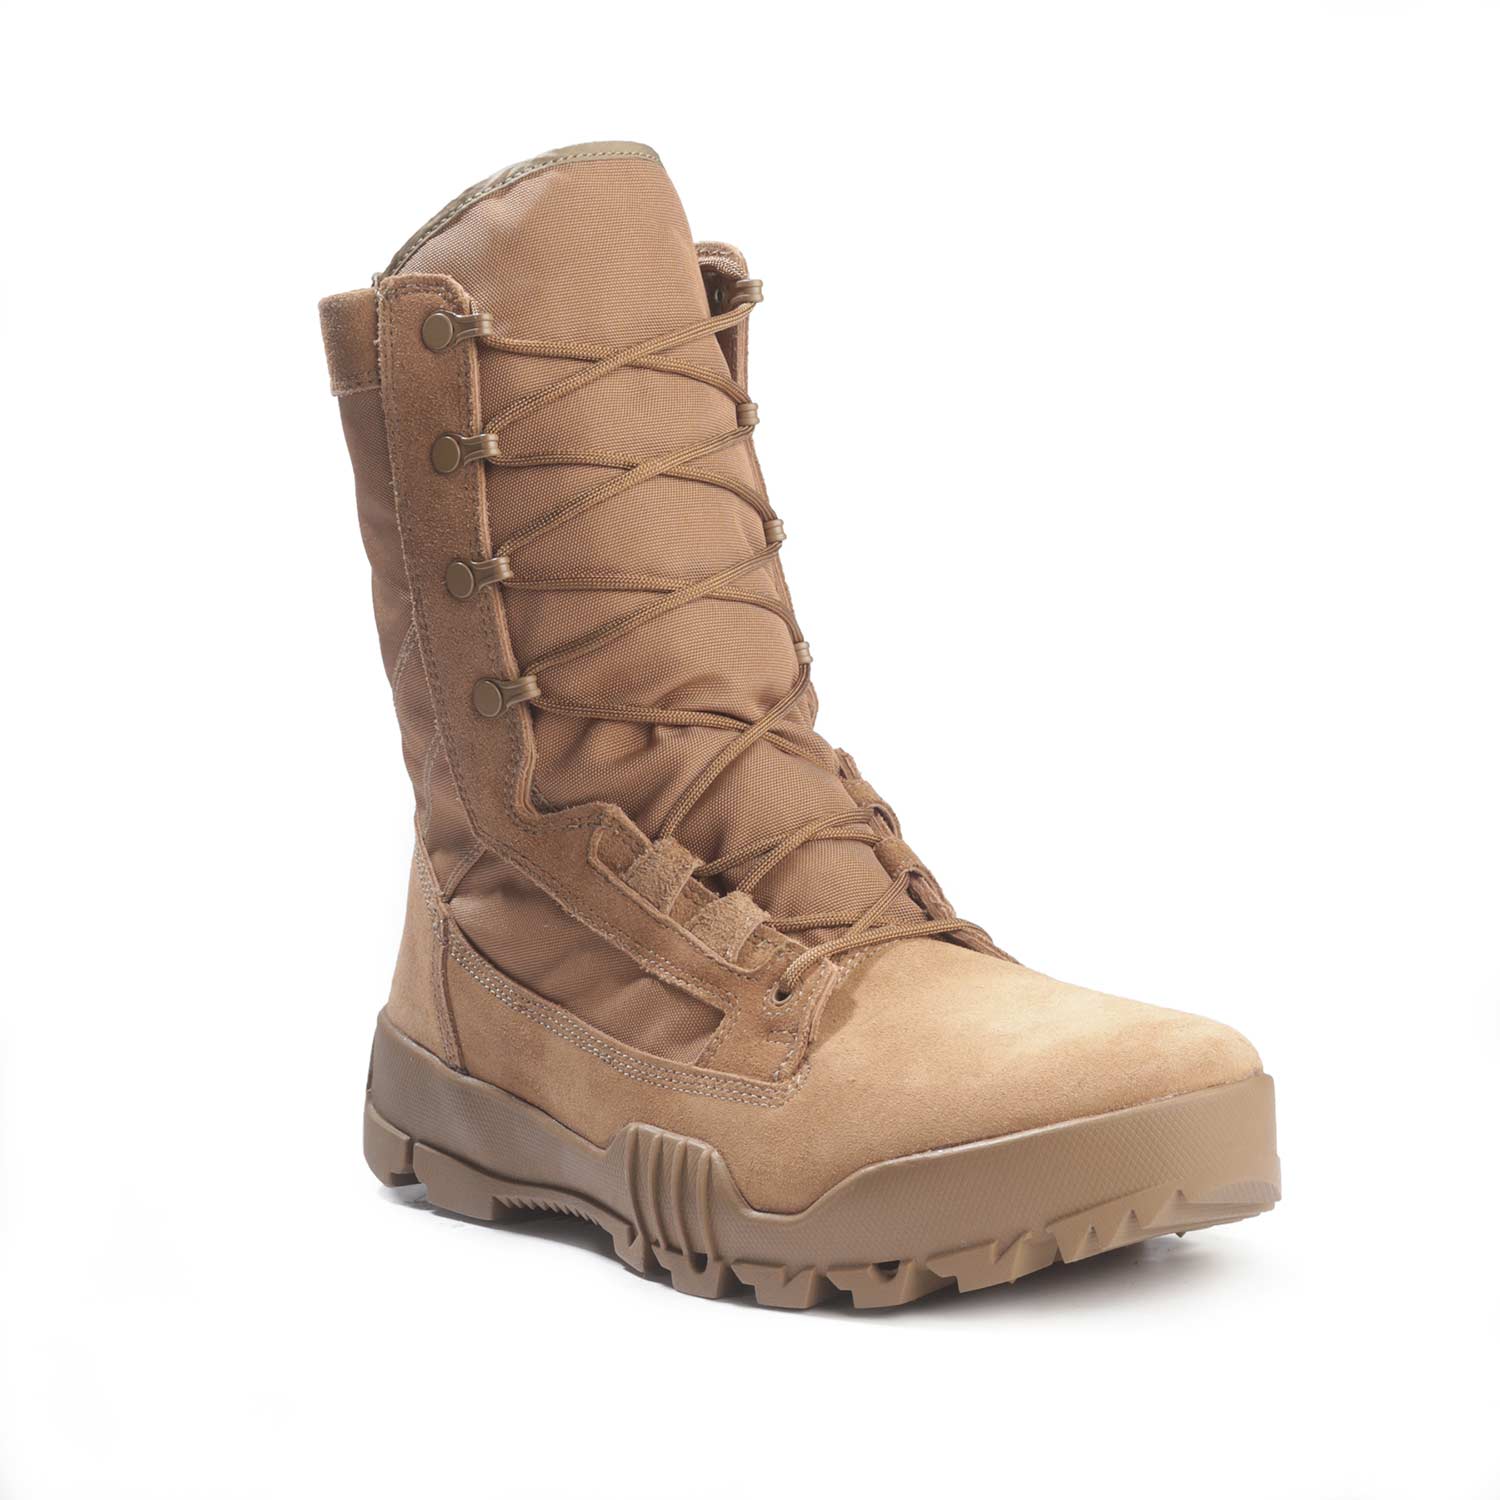 Nike SFB Jungle 8" Leather Boot (Coyote Brown)